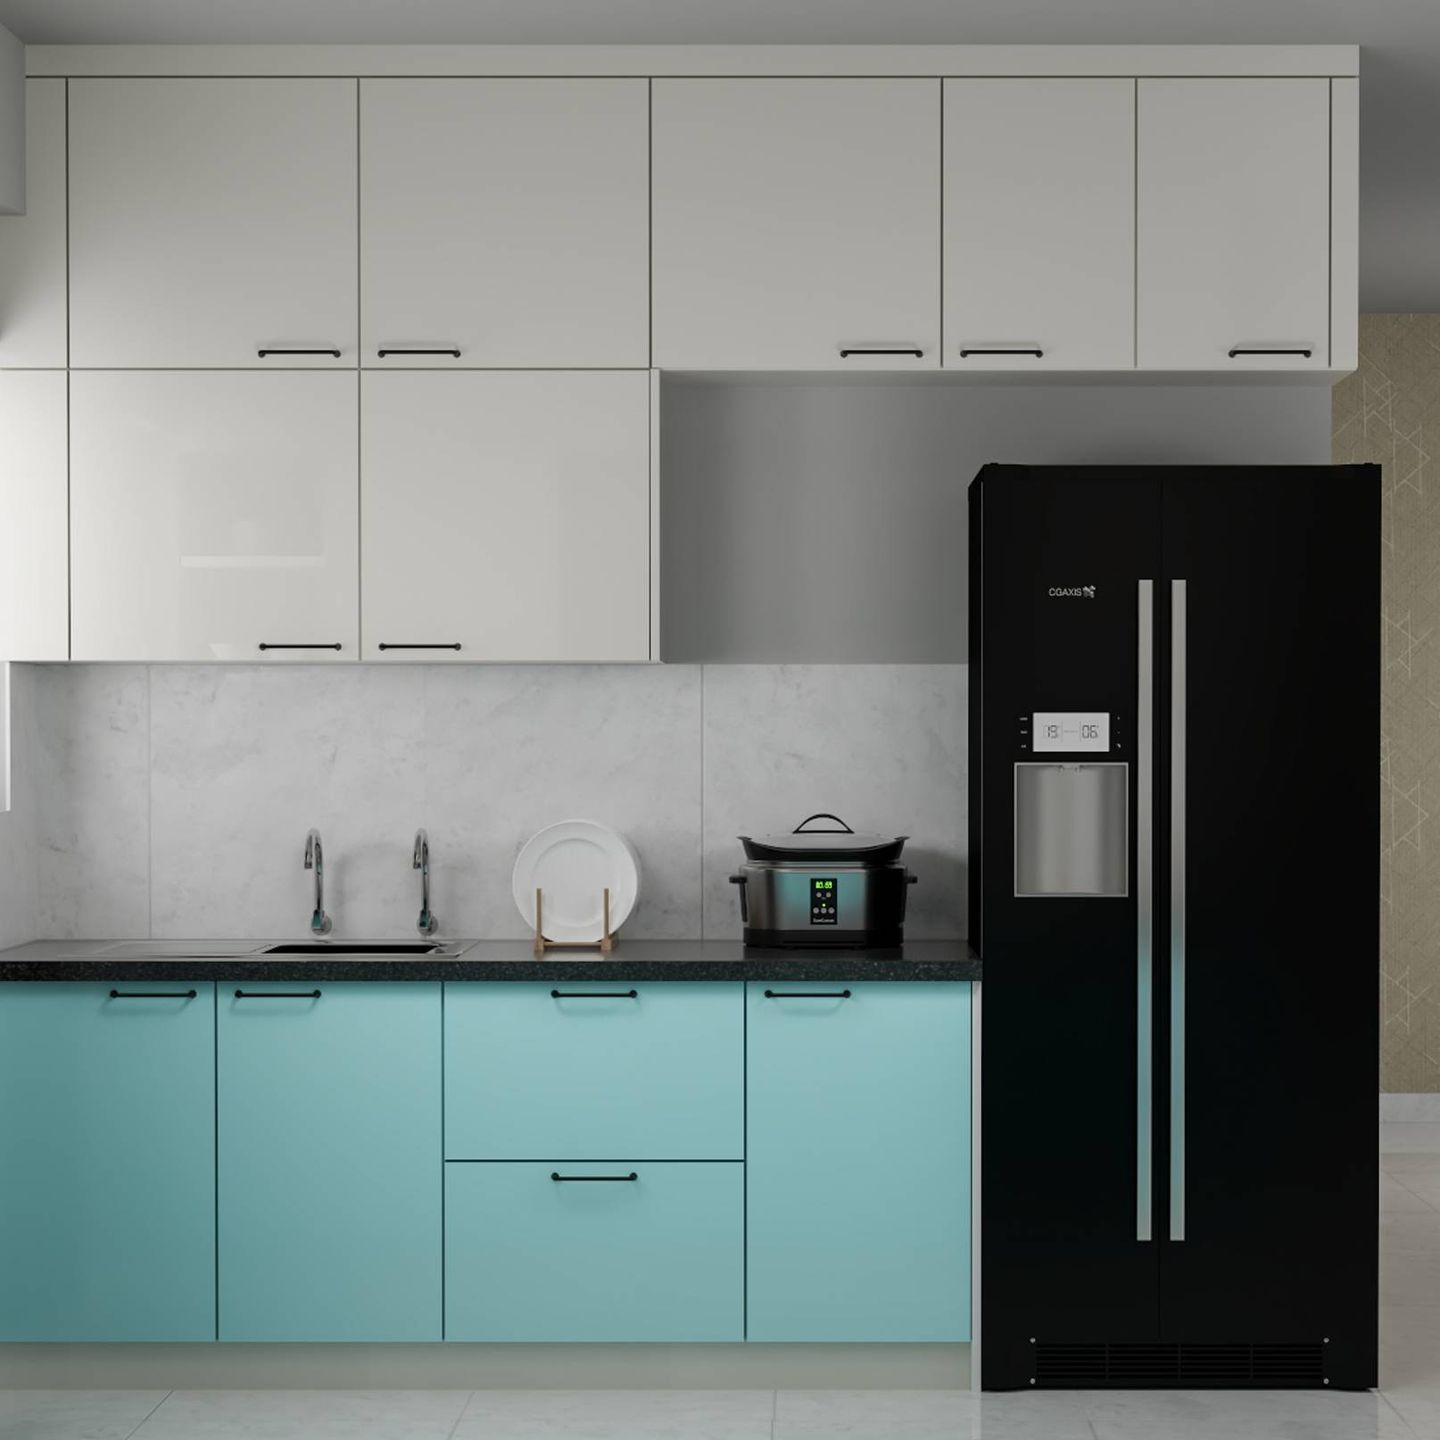 Compact Parallel Kitchen Design In Blue And White